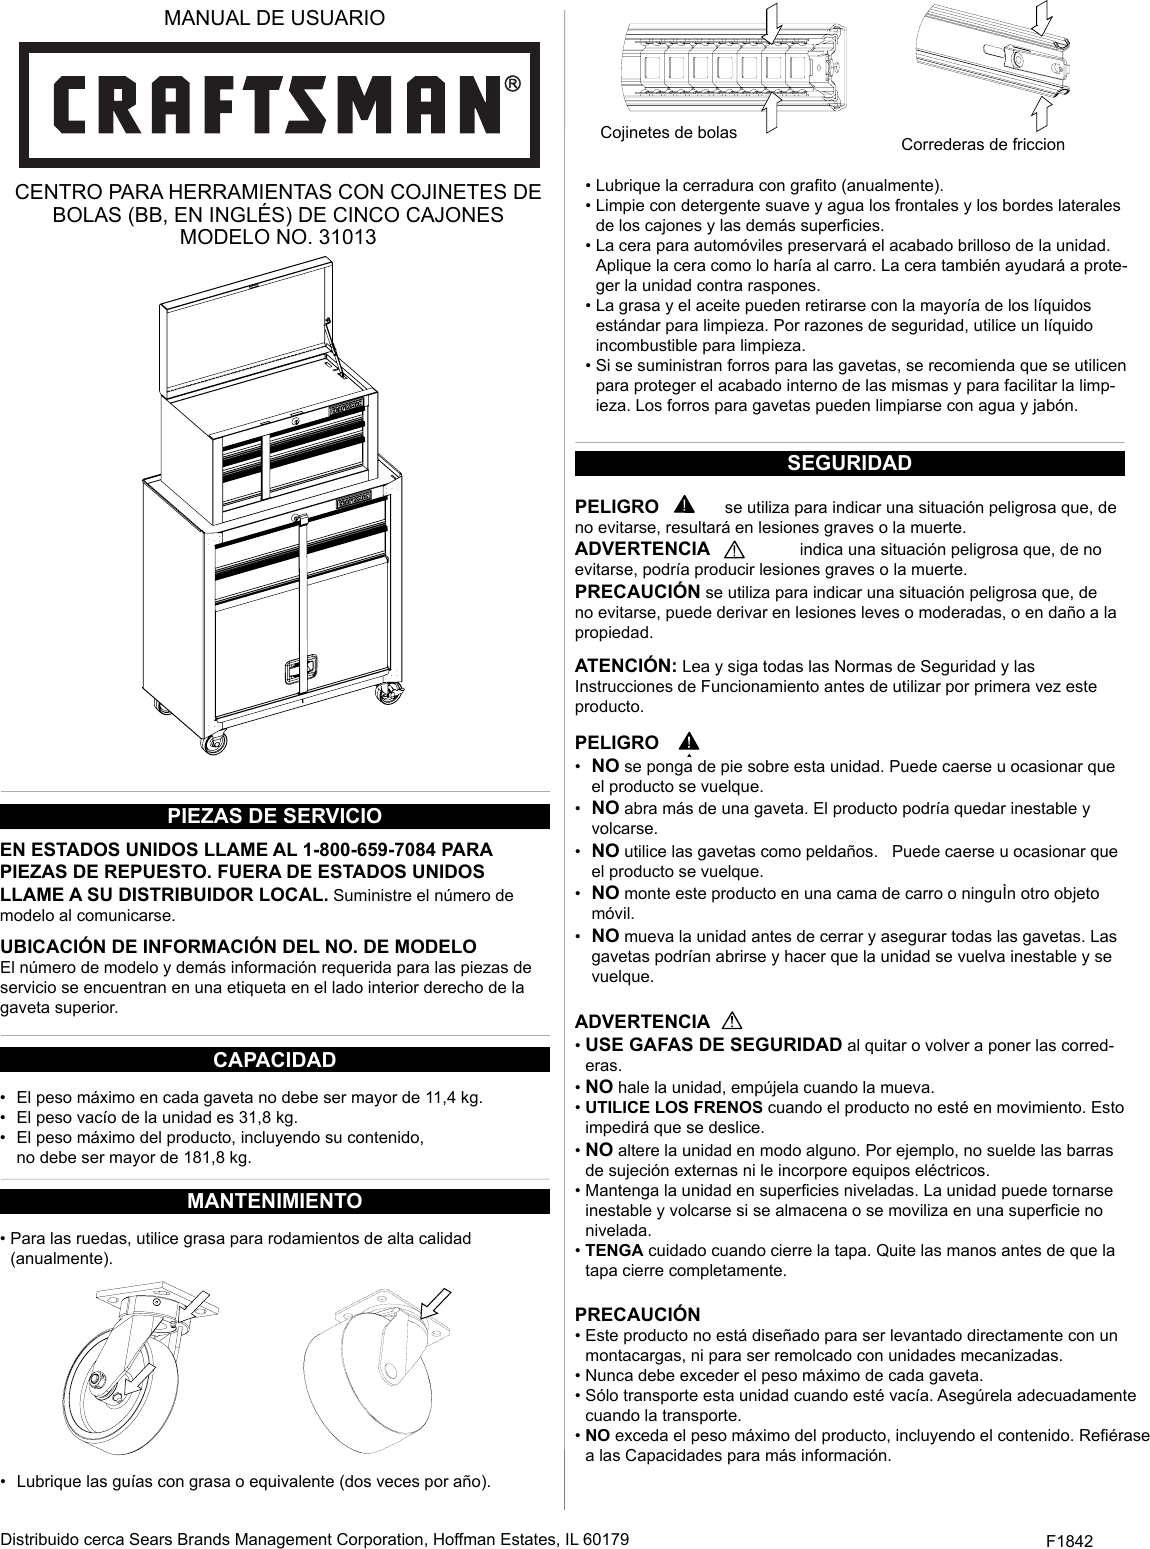 Page 5 of 8 - Craftsman Craftsman-5-Drawer-Standard-Duty-Ball-Bearing-Tool-Center-Black-Use-And-Care-Manual-  Craftsman-5-drawer-standard-duty-ball-bearing-tool-center-black-use-and-care-manual